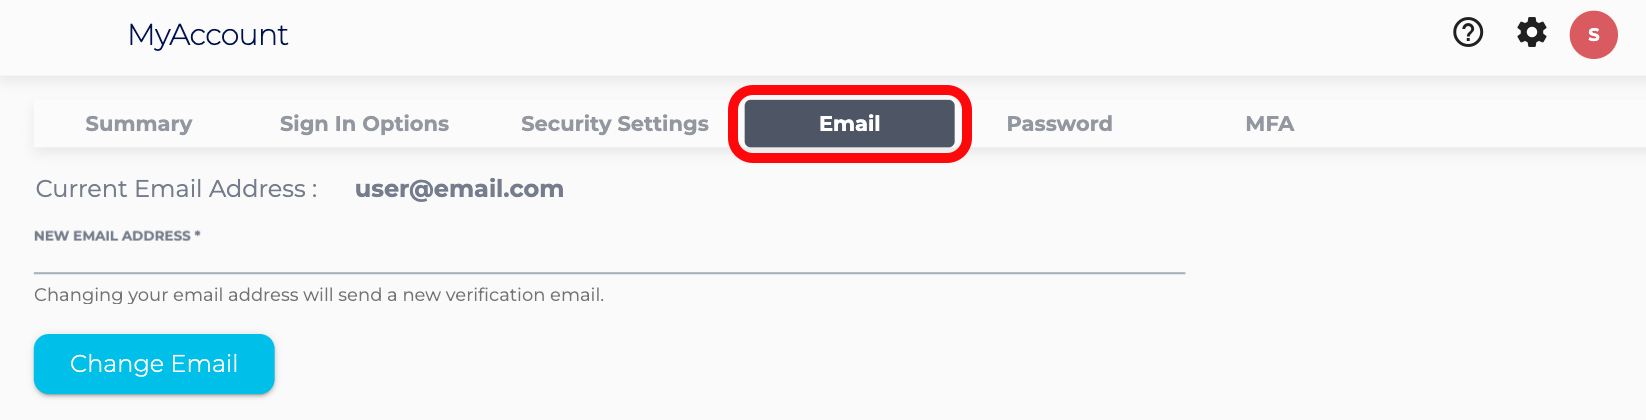 The Email tab is the location to change a user's email address.